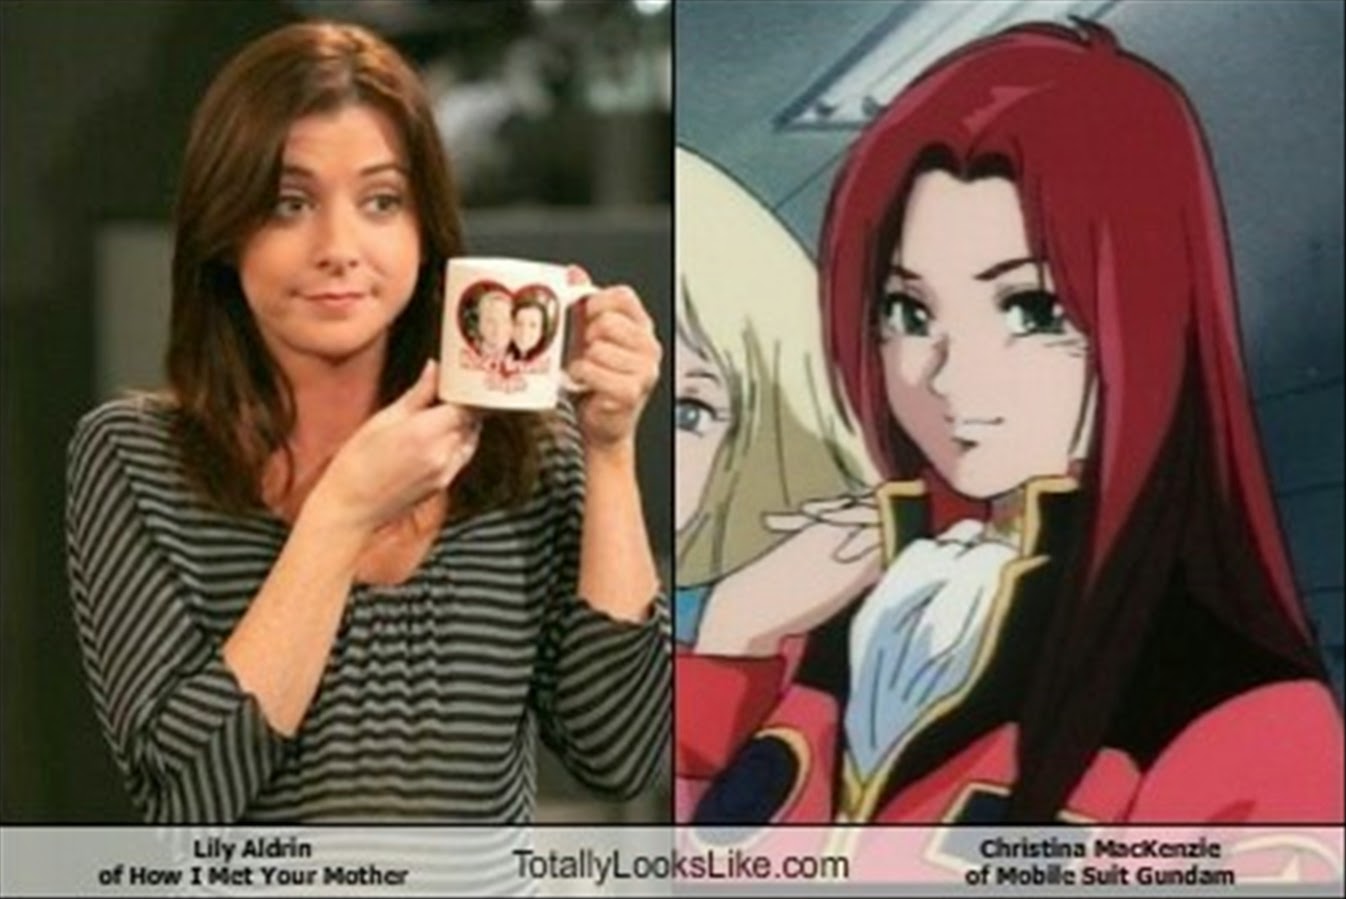 Lily Aldrin of How I Met Your Mother Totally Looks Like Christina MacKenzie of Mobile Suit Gundam